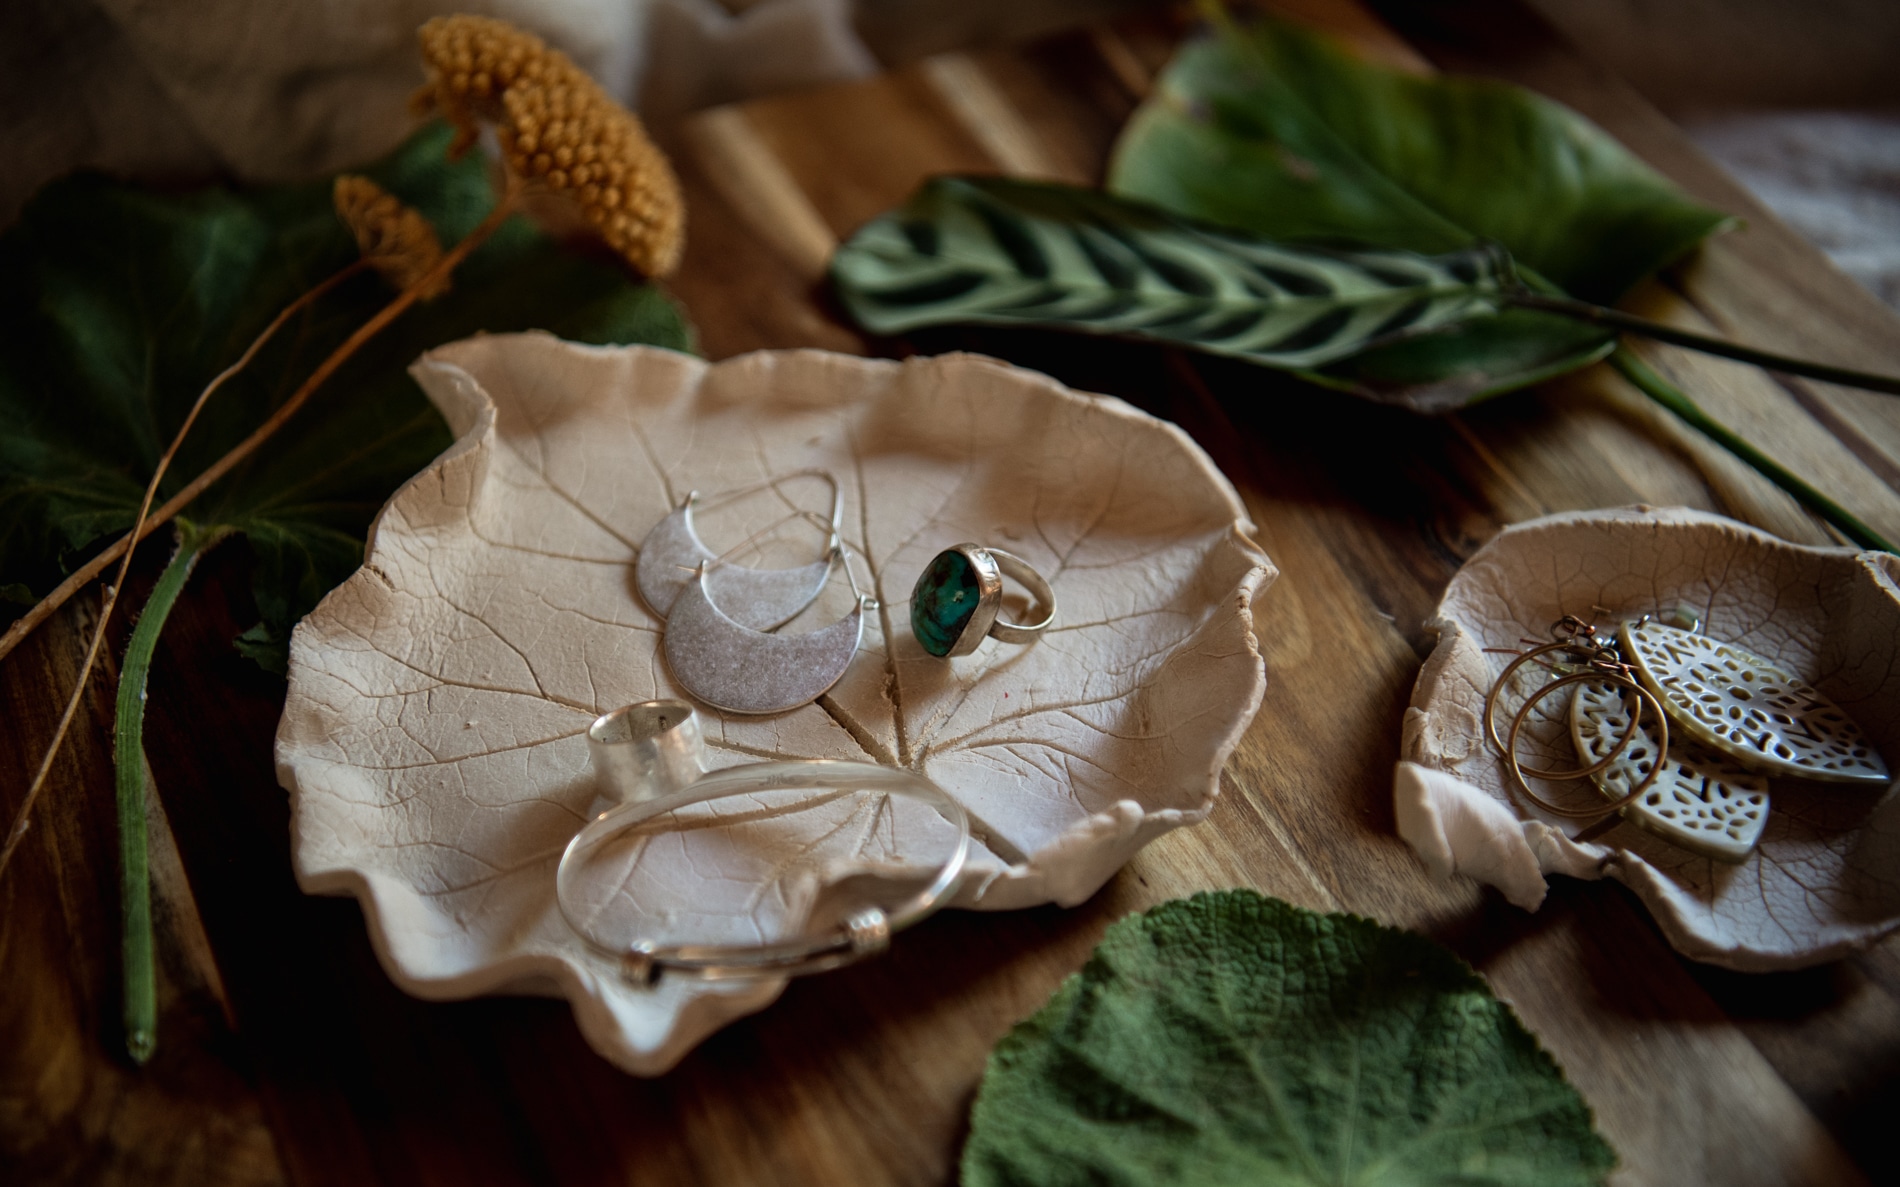 Completed leaf jewelry dish.